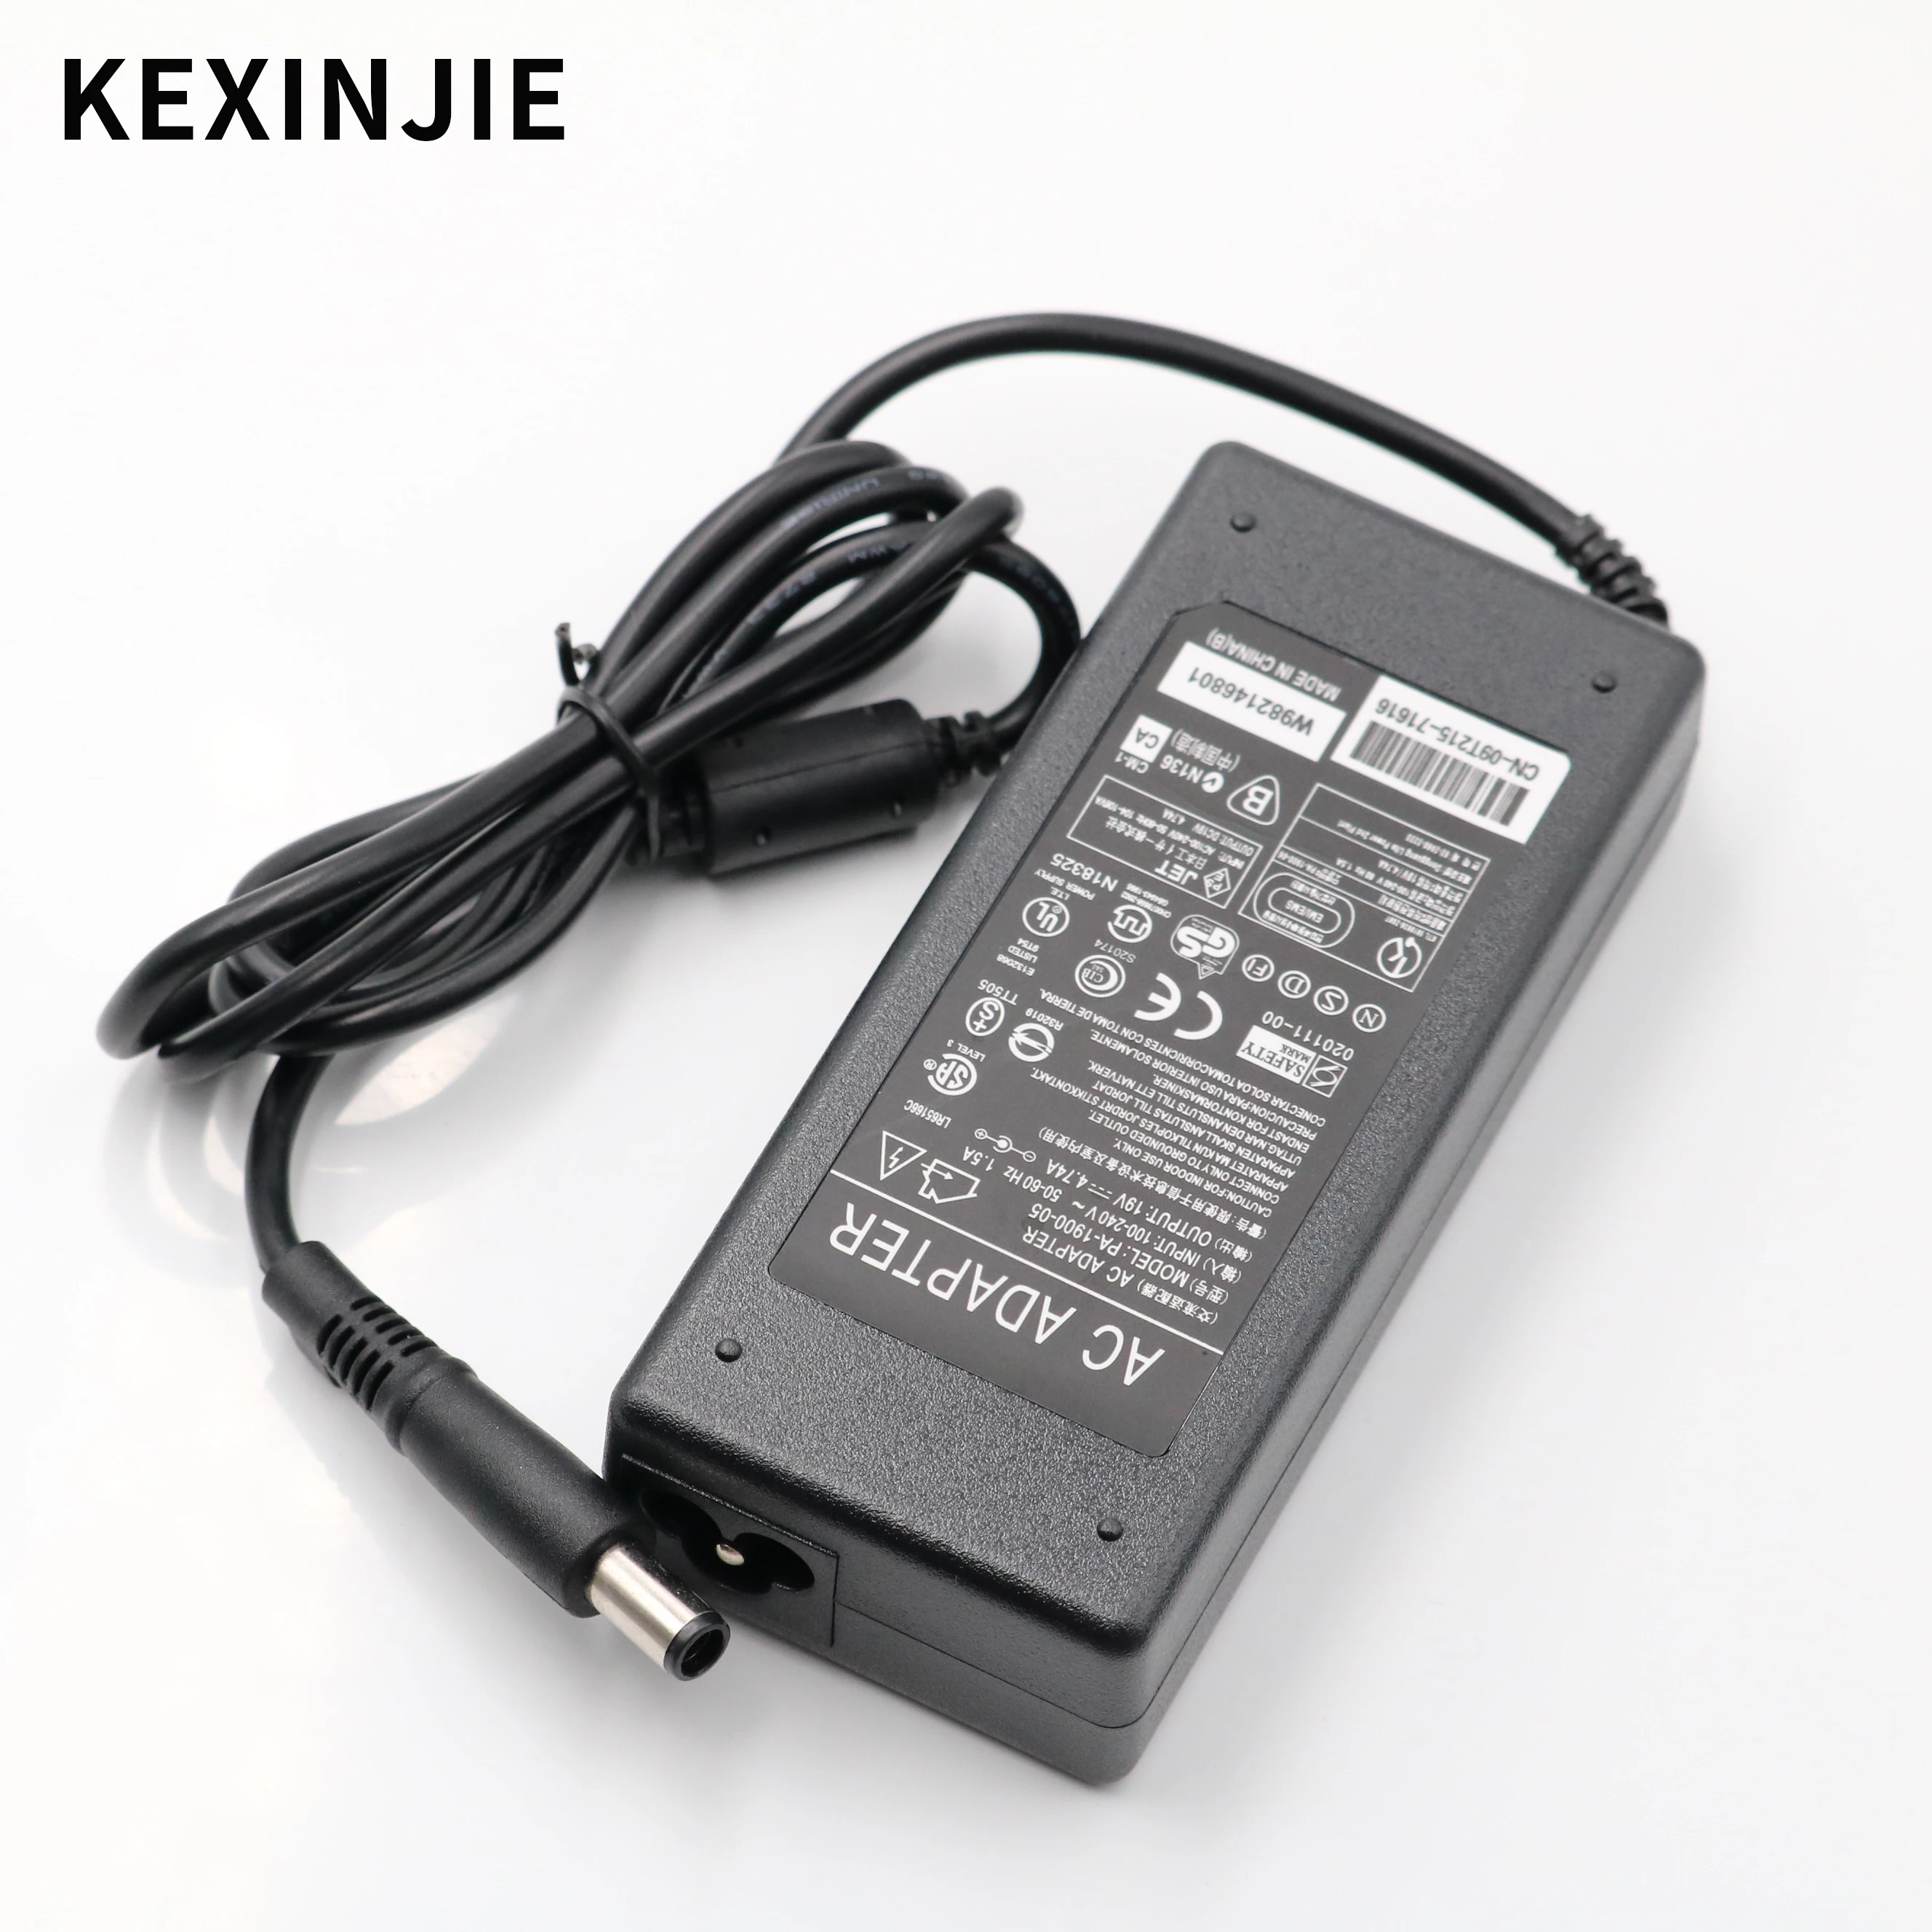 

19V 4.74A Laptop adapt Power Supply Charger for HP Probook 4520s 4710S 4720s 6531s 6440B 6445B 6450b 6460B 6545B 6550 6550B 6555